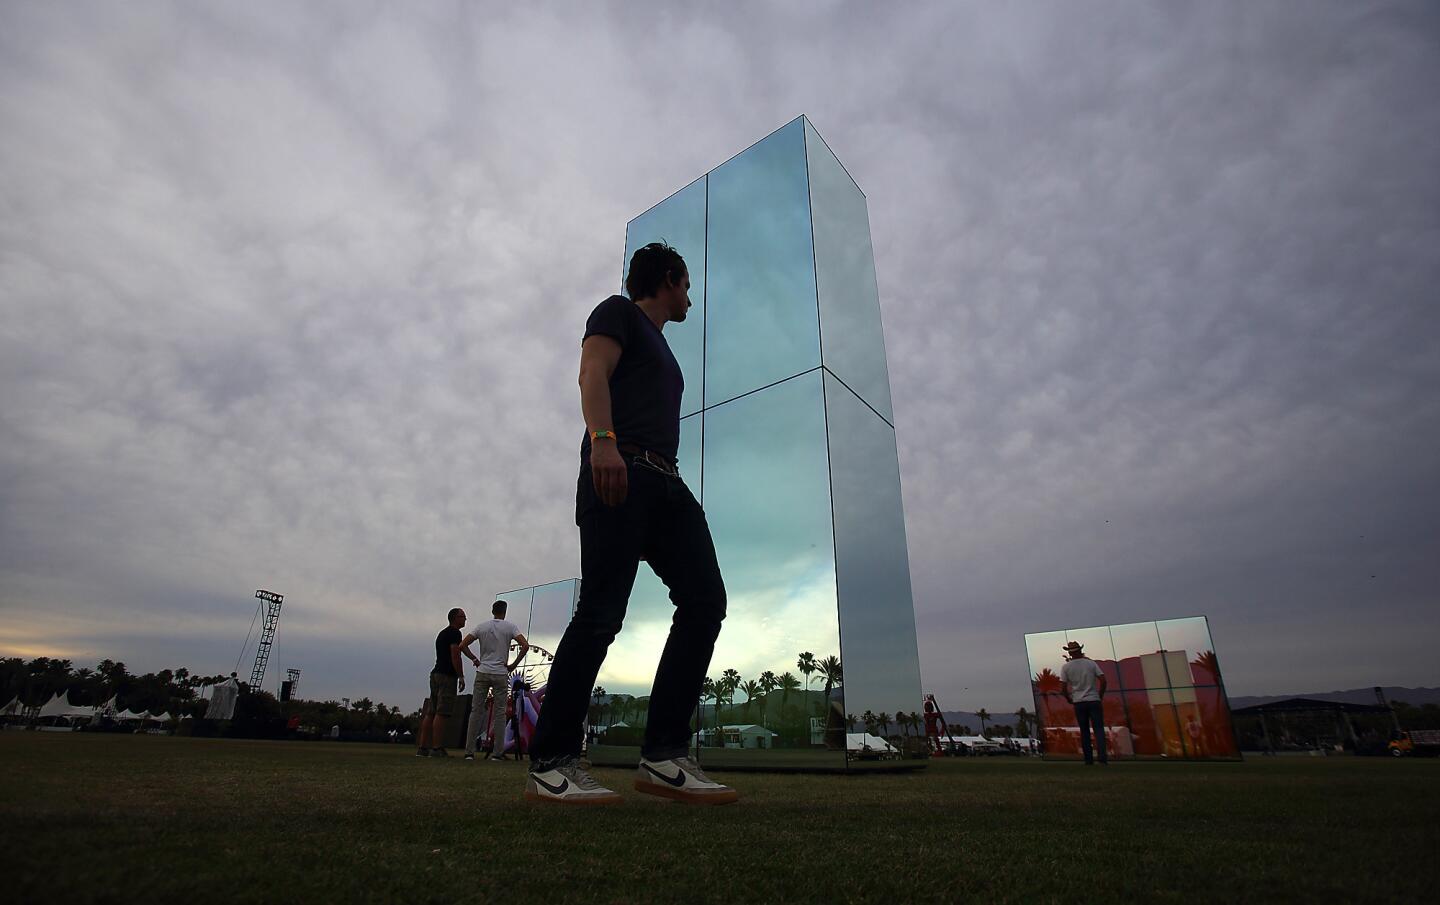 The art installation "Reflection Field" by Phillip K. Smith III stands at the Coachella Music and Arts Festival in Indio.